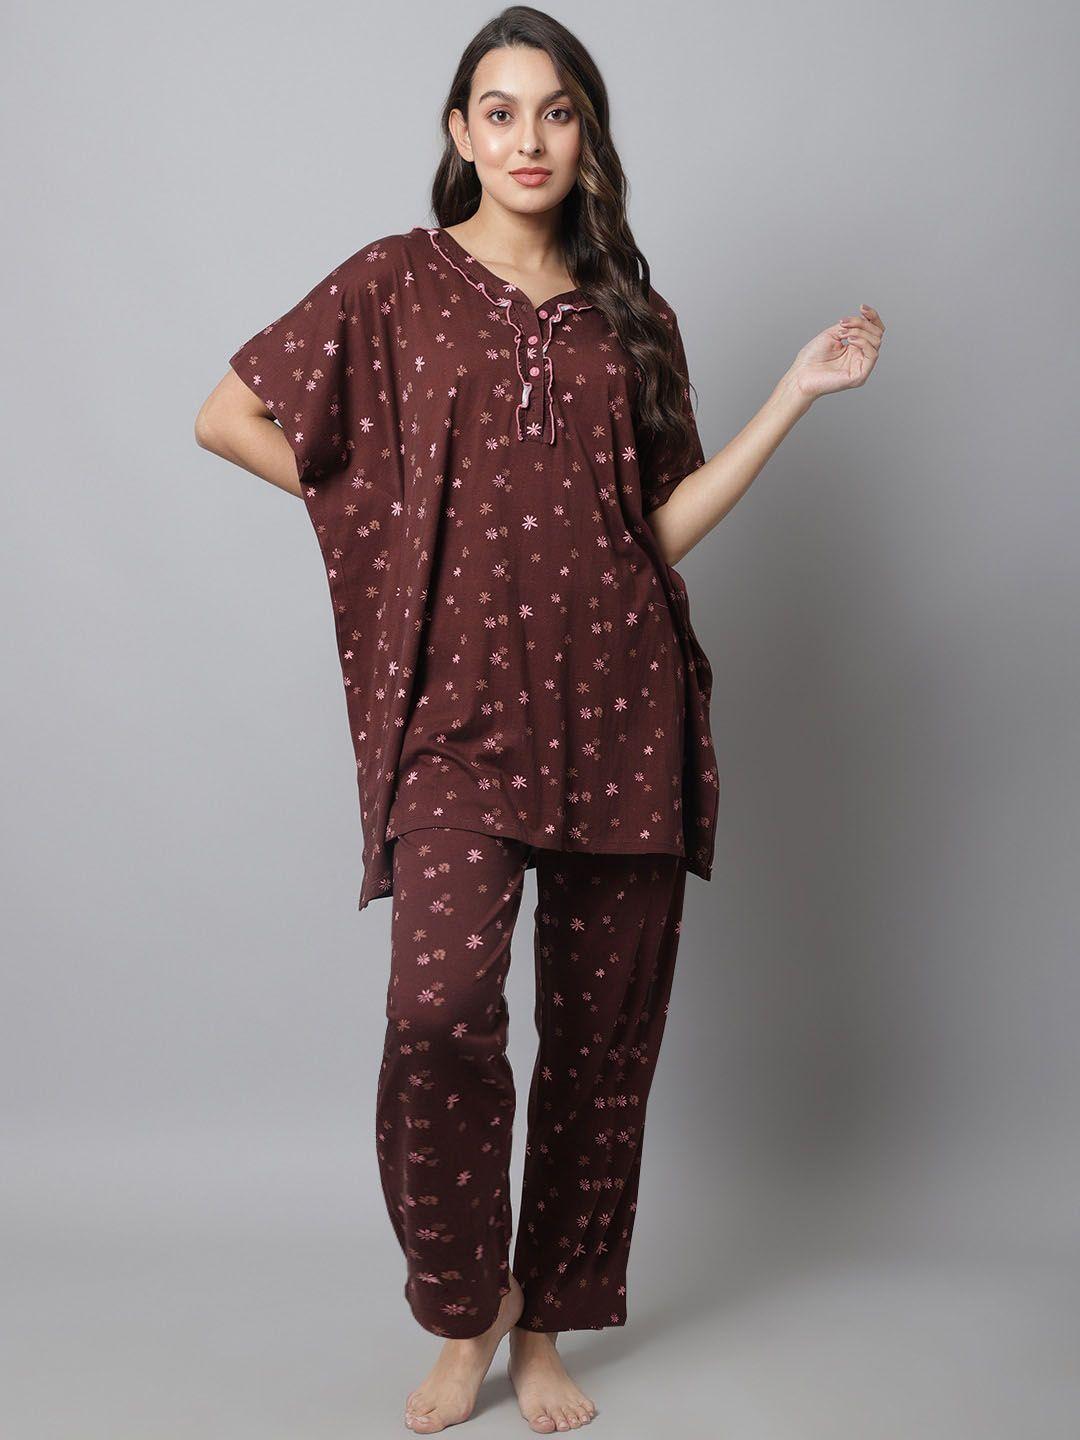 kanvin floral printed night suit